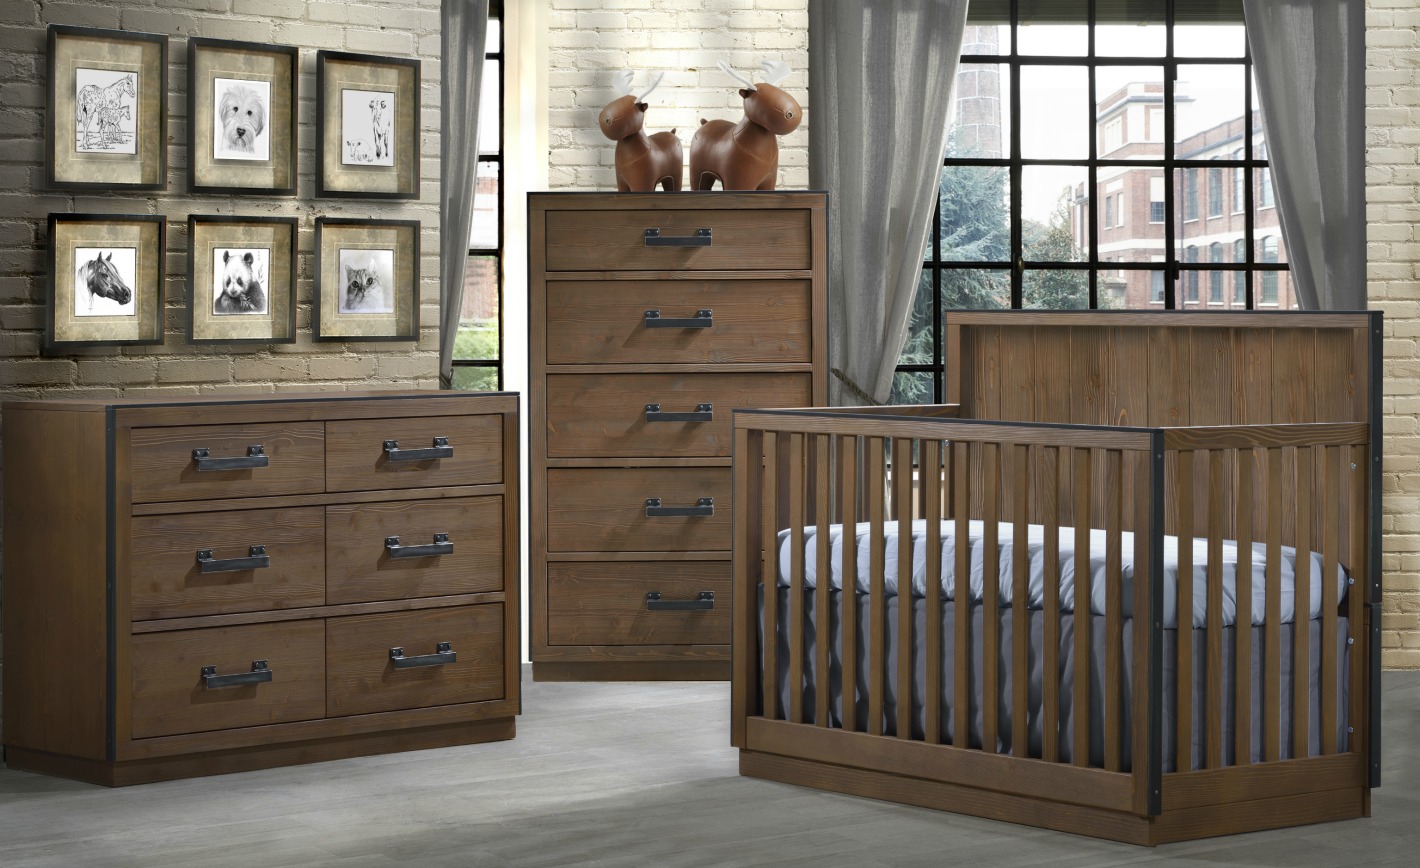  Farmhouse  Style Nursery Furniture from Natart Project 